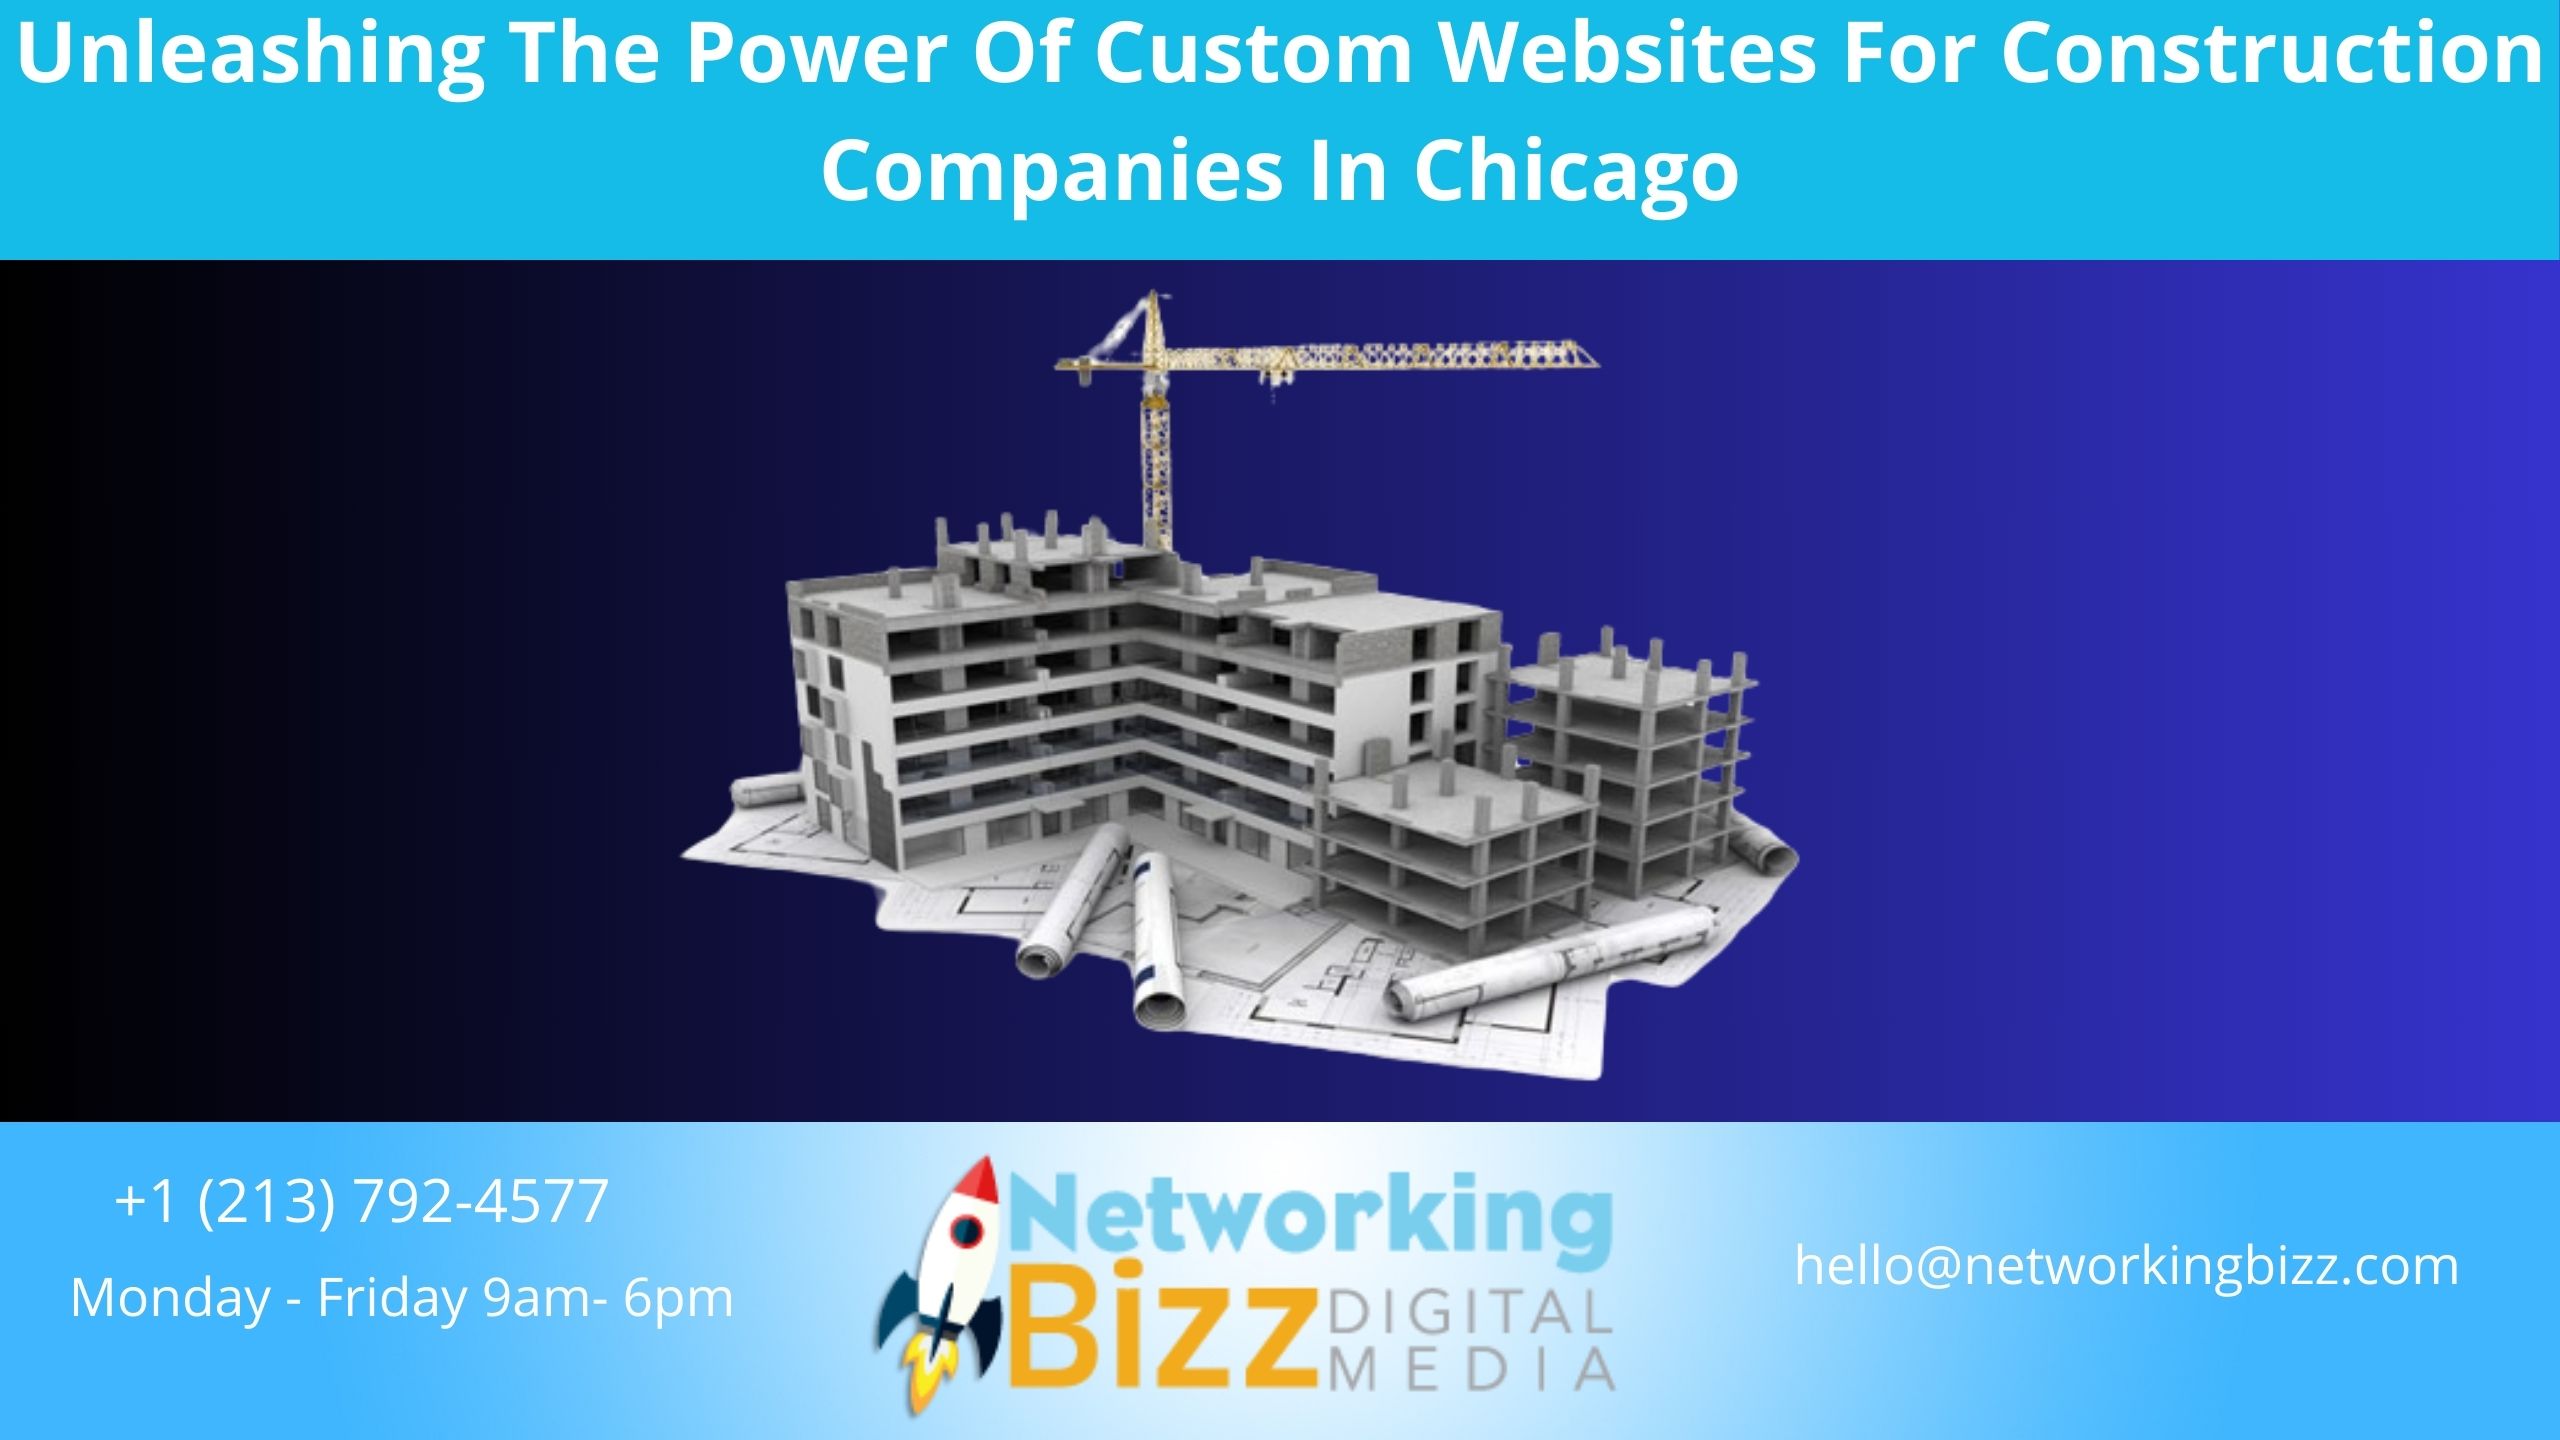 Unleashing The Power Of Custom Websites For Construction Companies In Chicago